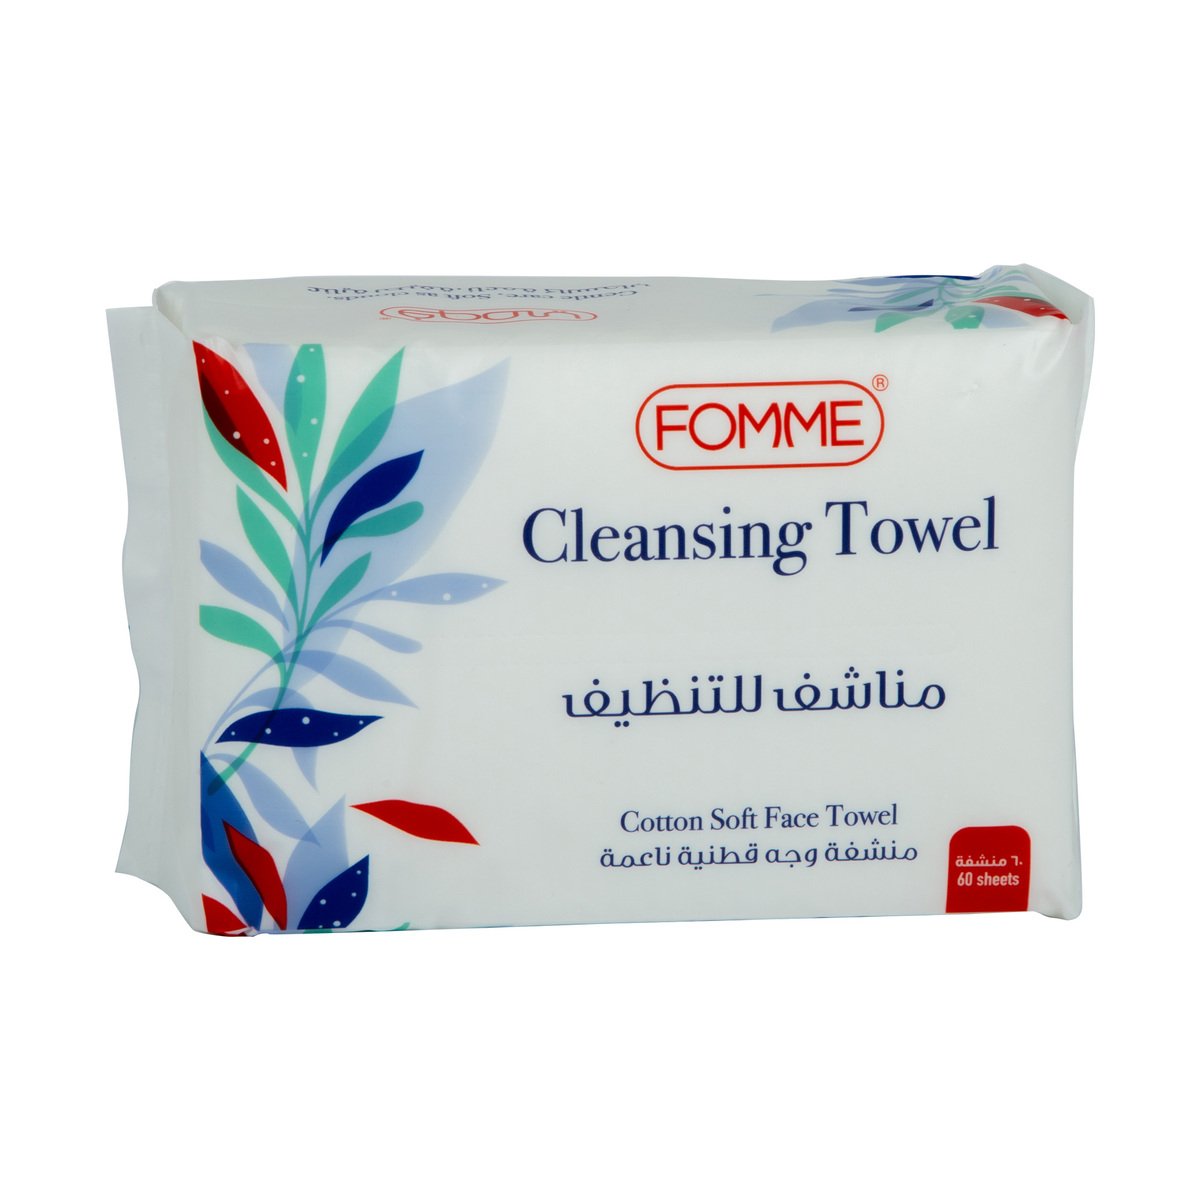 Fomme Cleansing Towel 60pcs